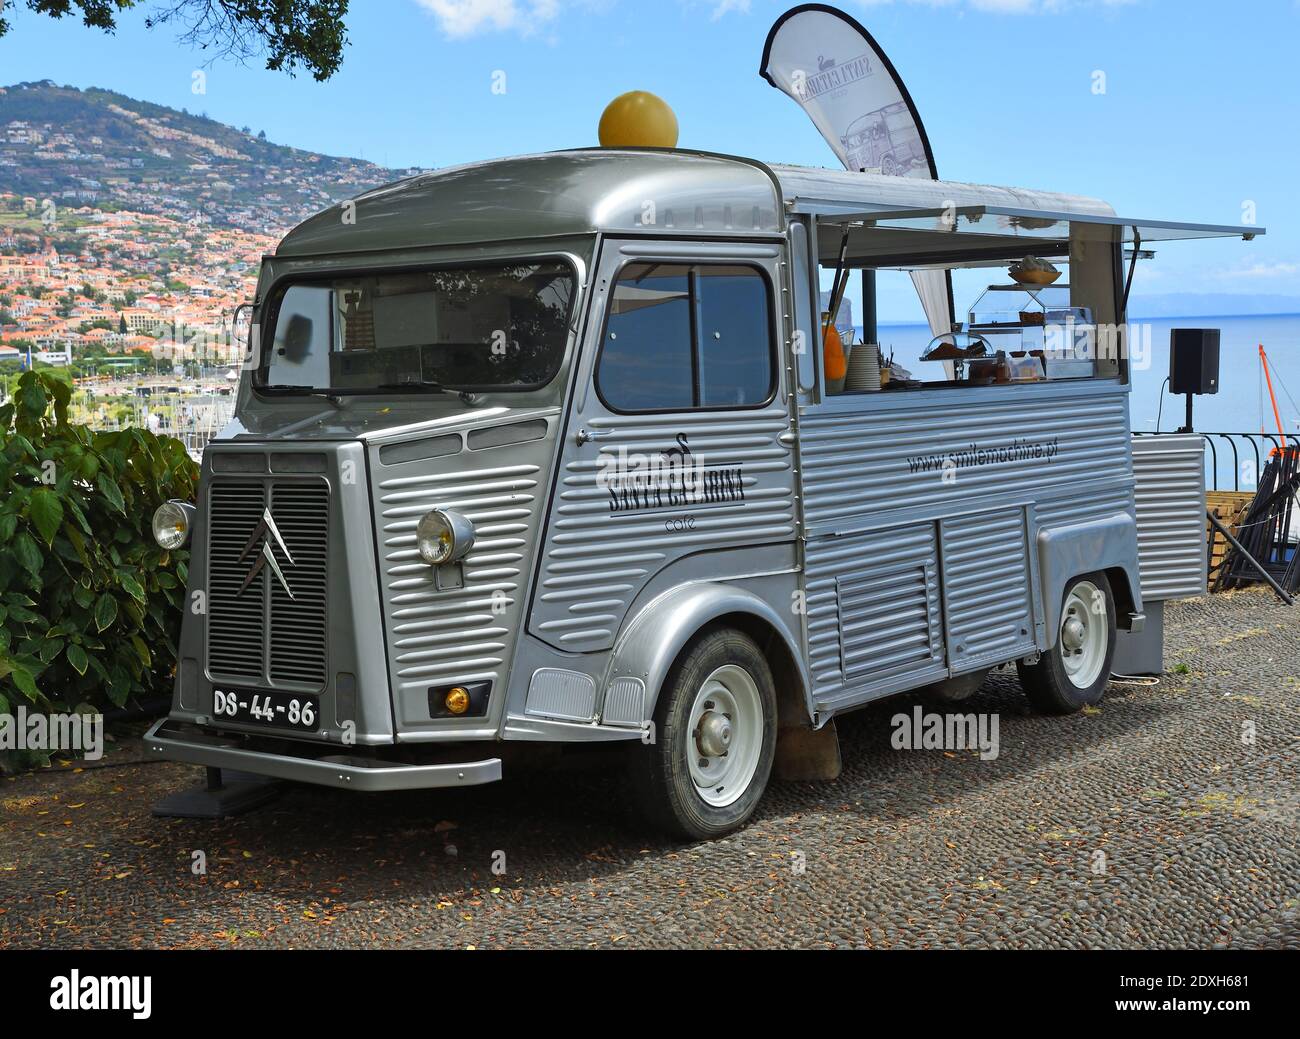 Classic Citroën van being used as a cafe in the park Funchal Madeira. Stock Photo